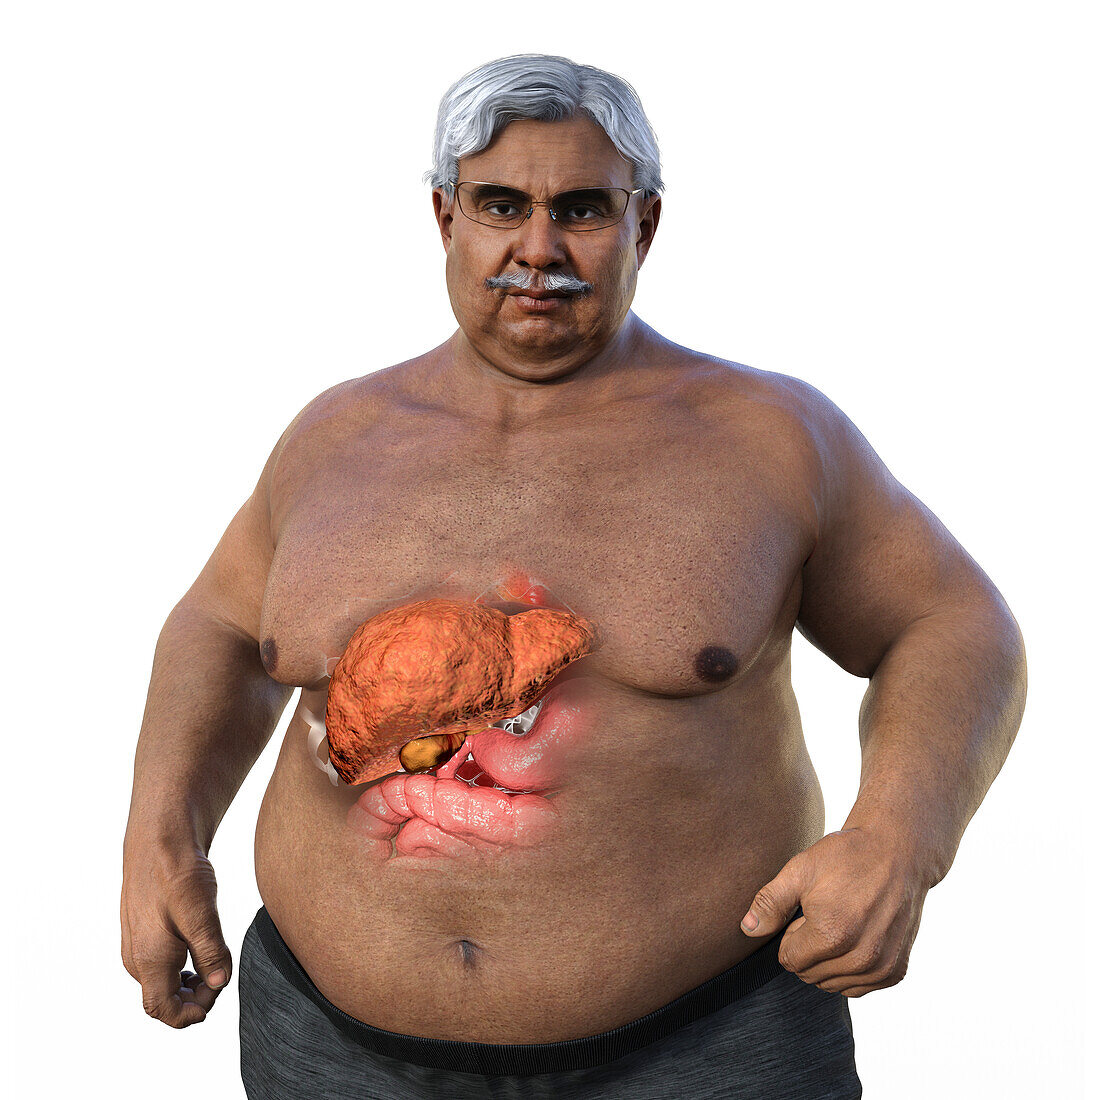 Overweight man with steatosis, illustration